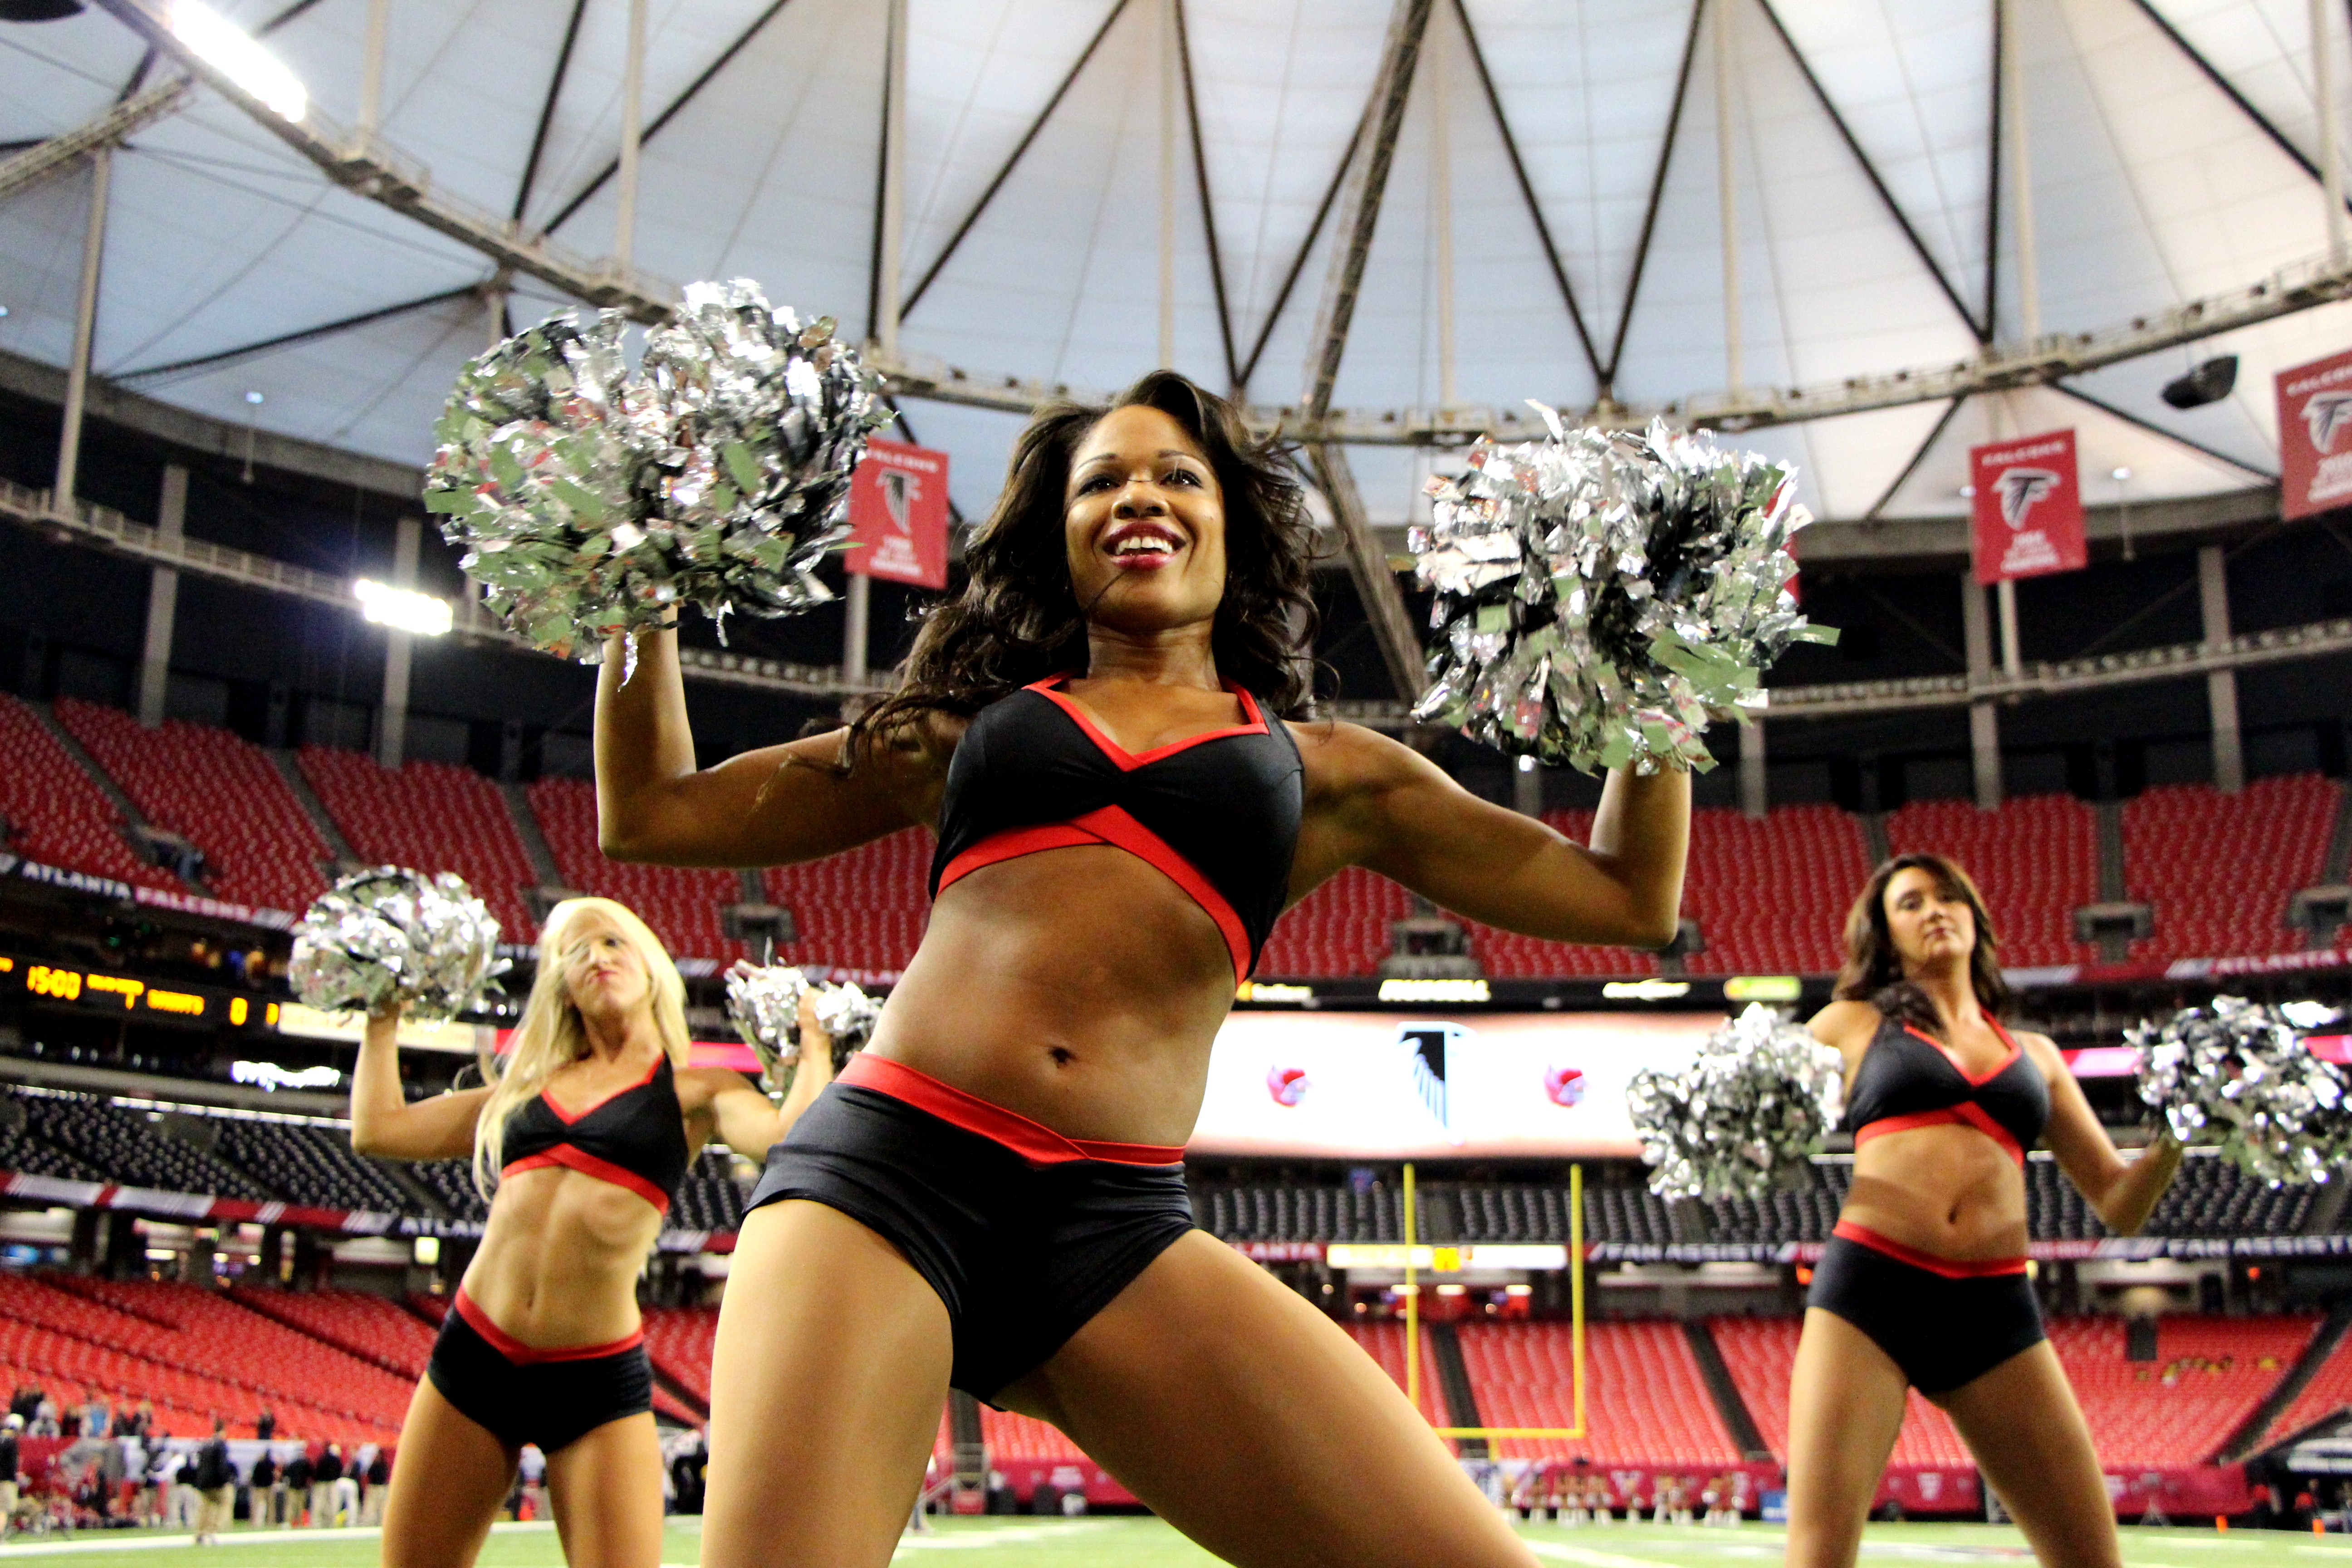 Altanta Falcons Cheerleader Denita and her team practicing before the game - 2